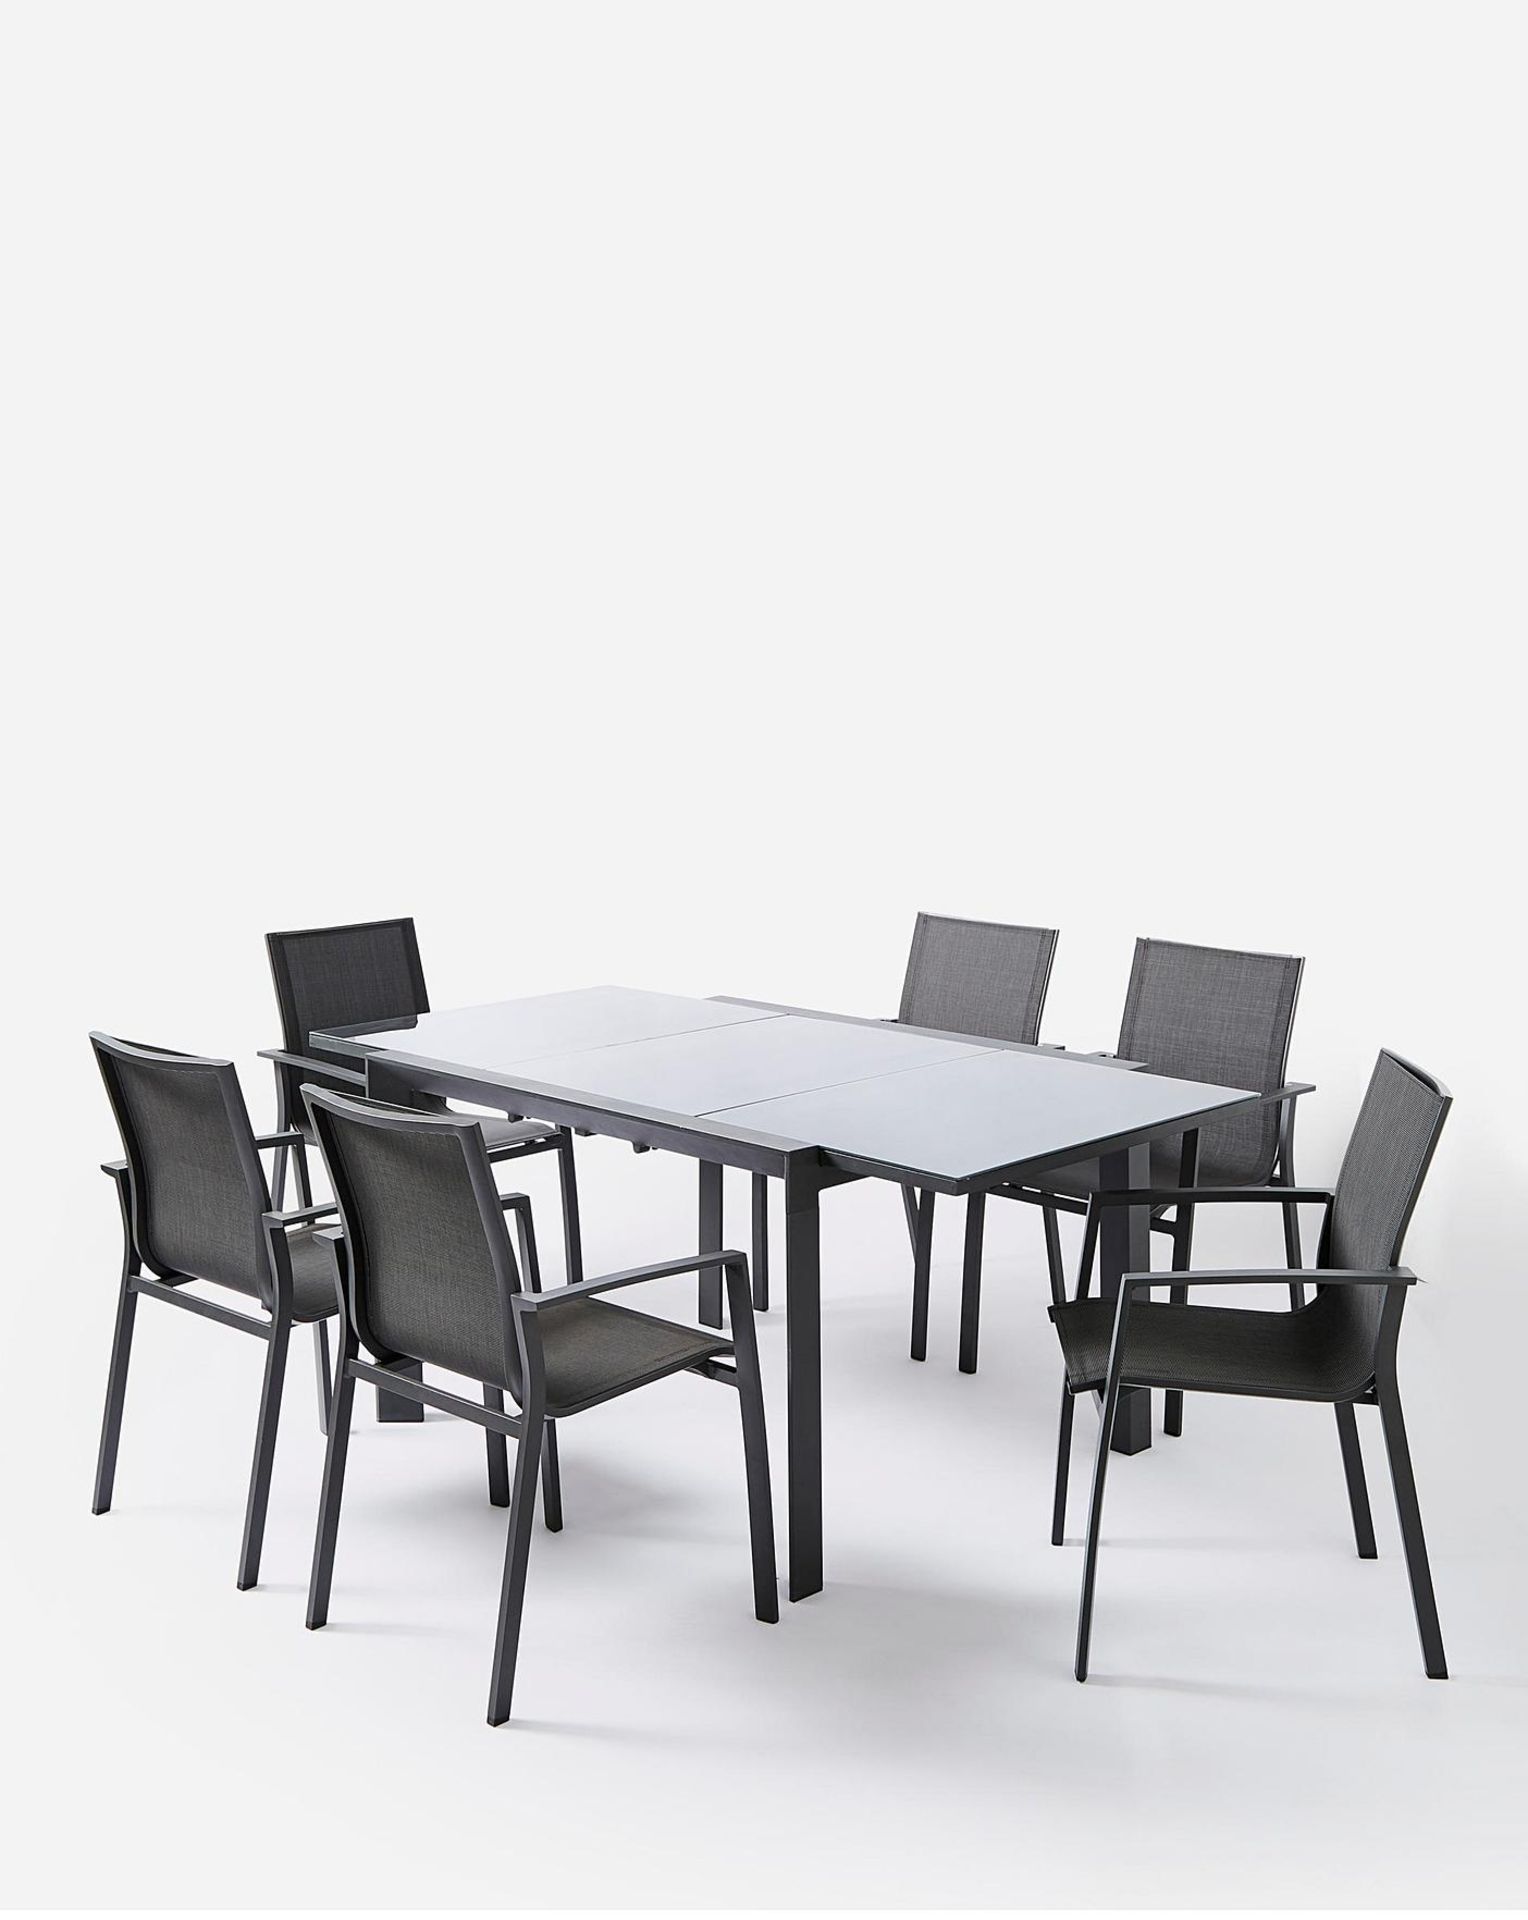 BRAND NEW Oslo 6 Seater Dining Set with Extendable Table. RRP £699 EACH. The Oslo Dining Set with - Image 3 of 3